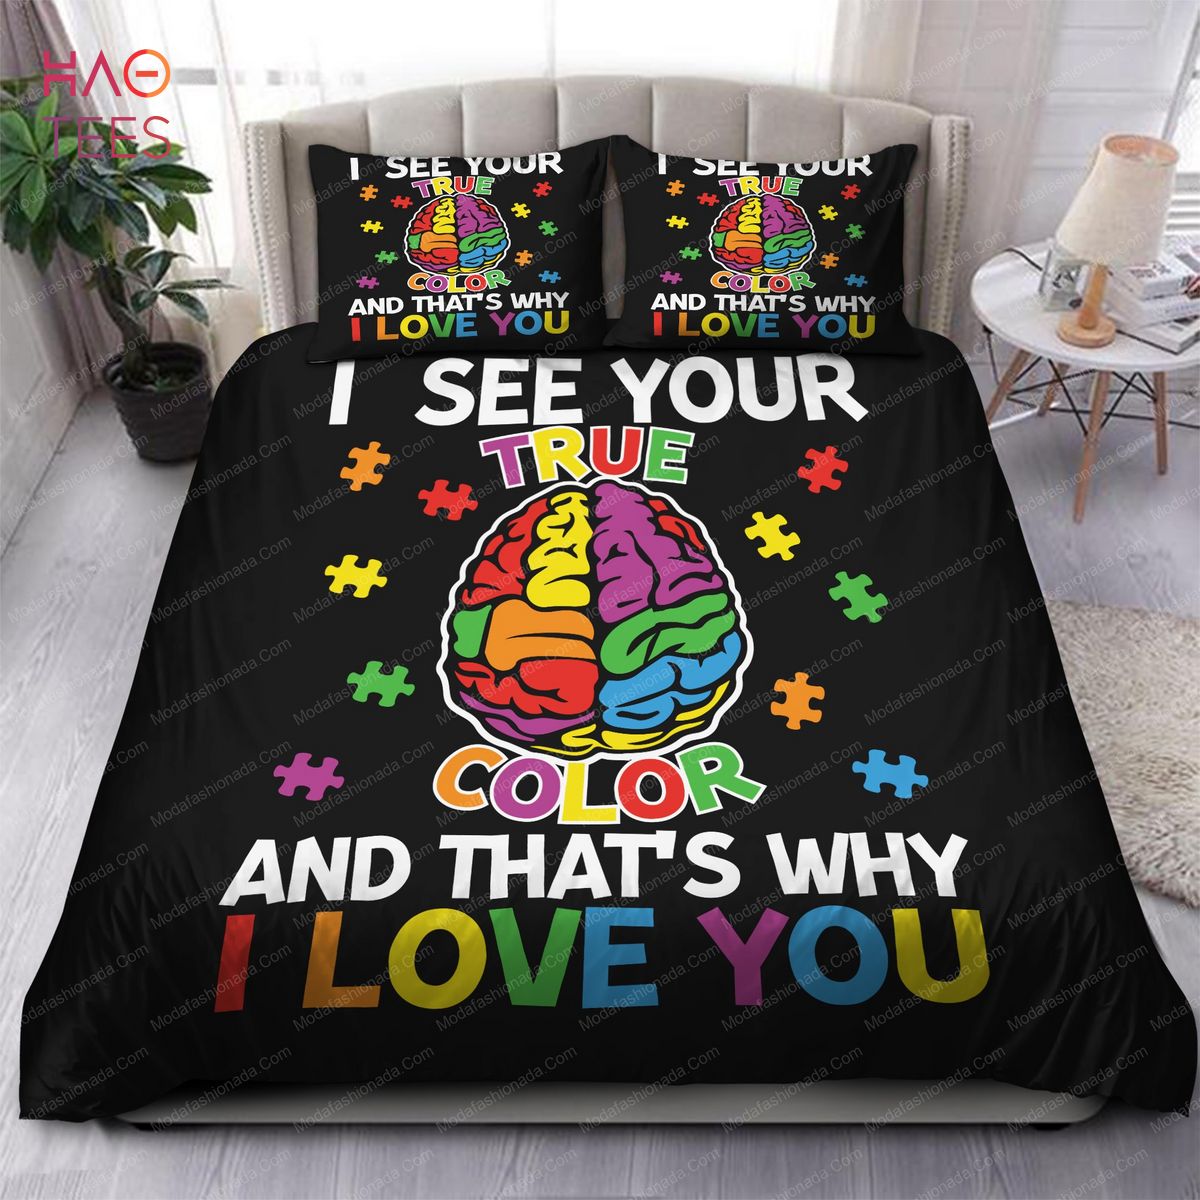 I See Your True Colors And That’s Why I Love You Bedding Sets